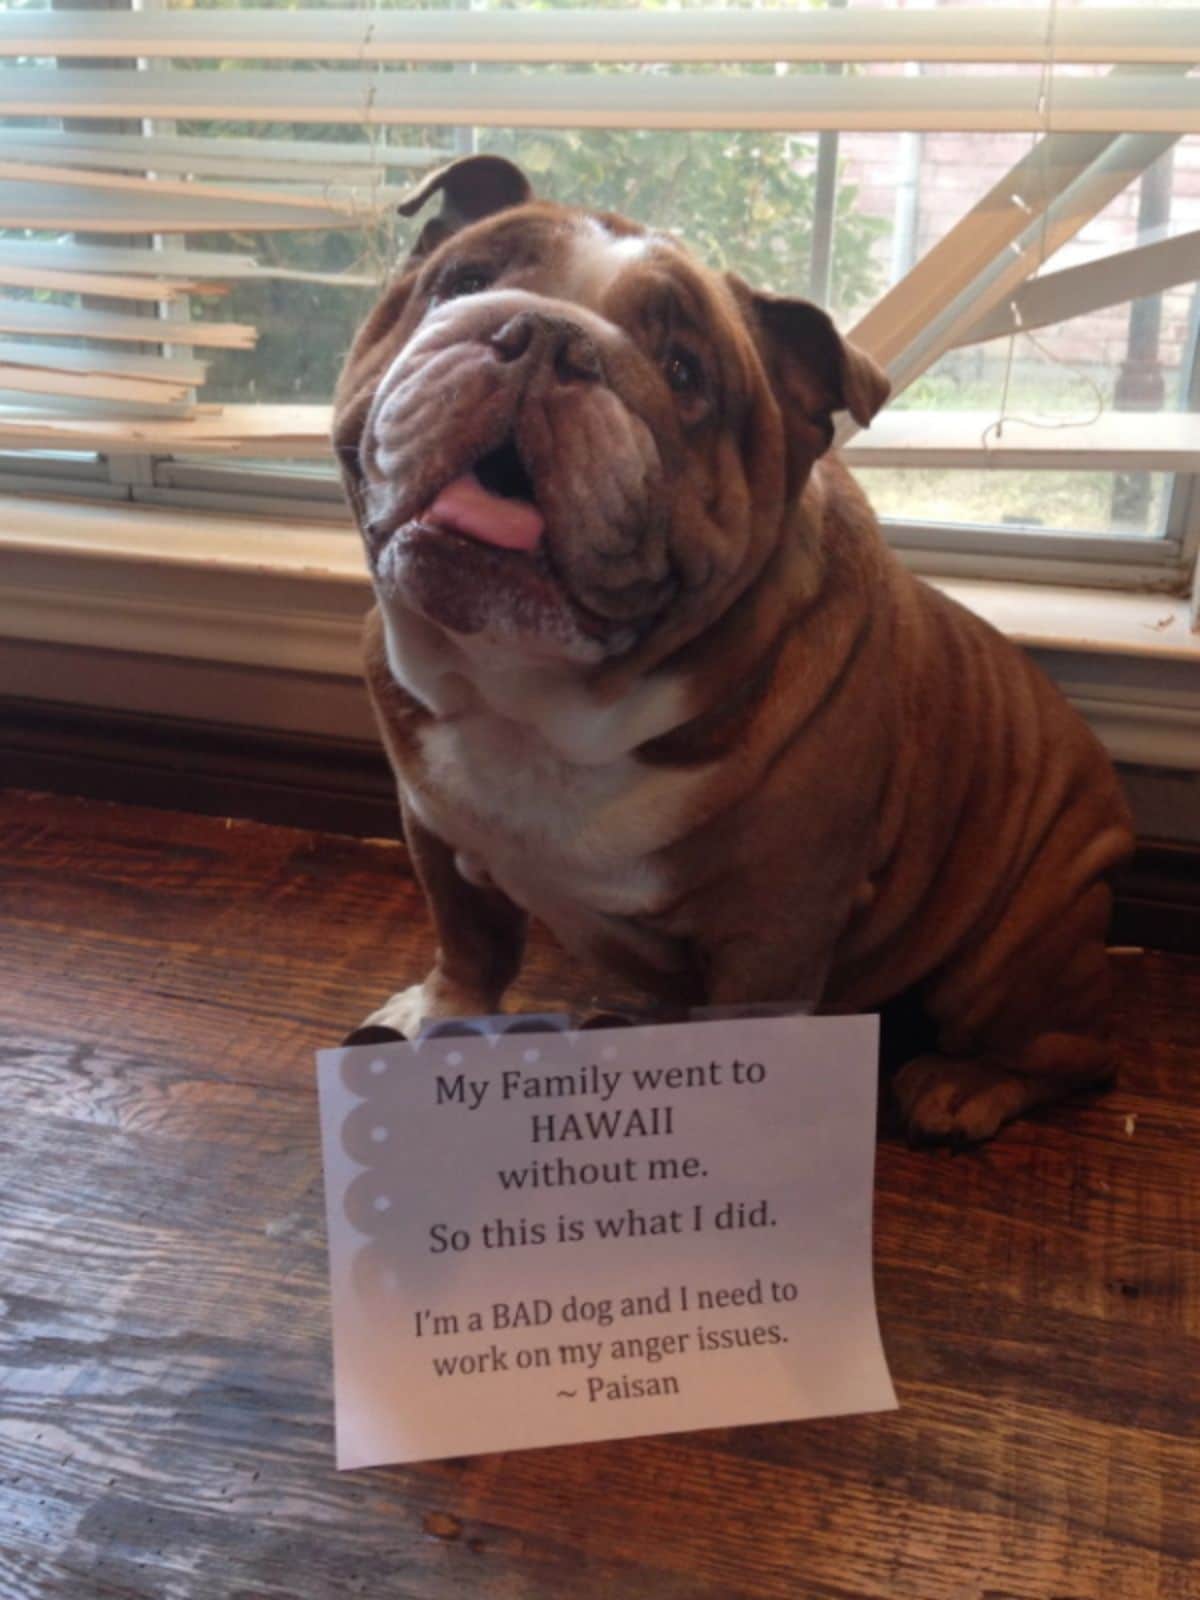 brown and white dog with a sign saying he wrecked the blinds because his family left him behind on vacation